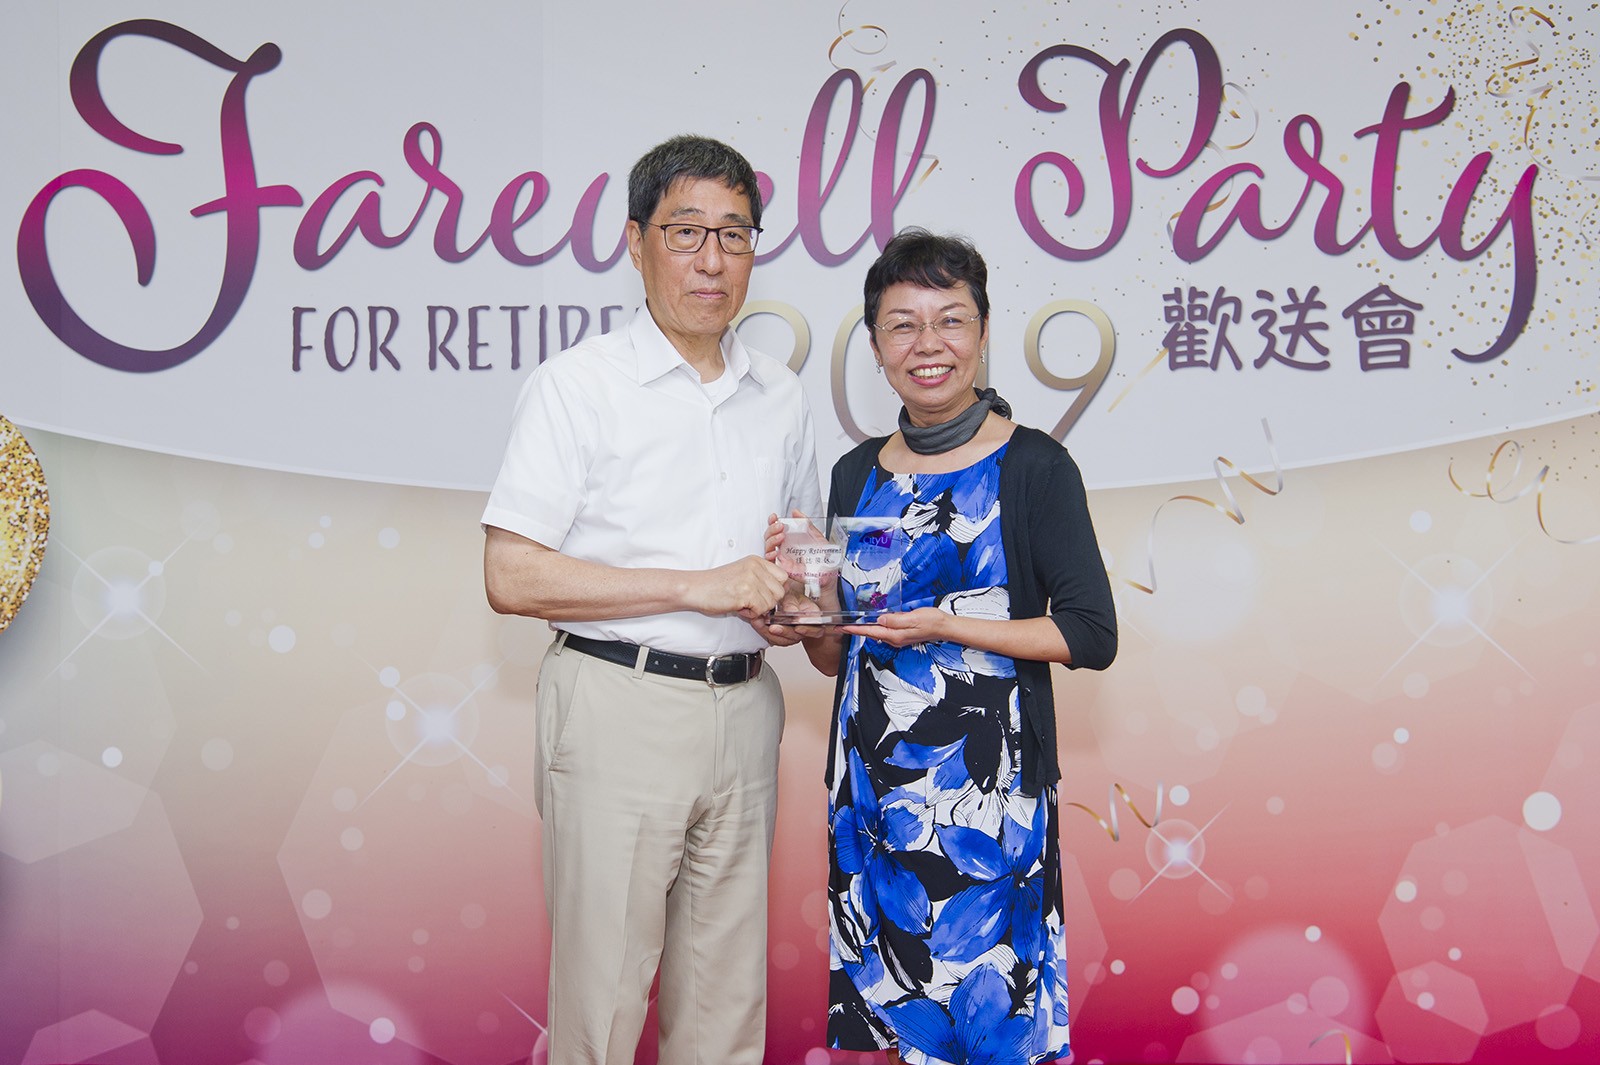 Professor Chong says she is most touched and gratified during her years at CityU when she witnessed her students’ steady development.